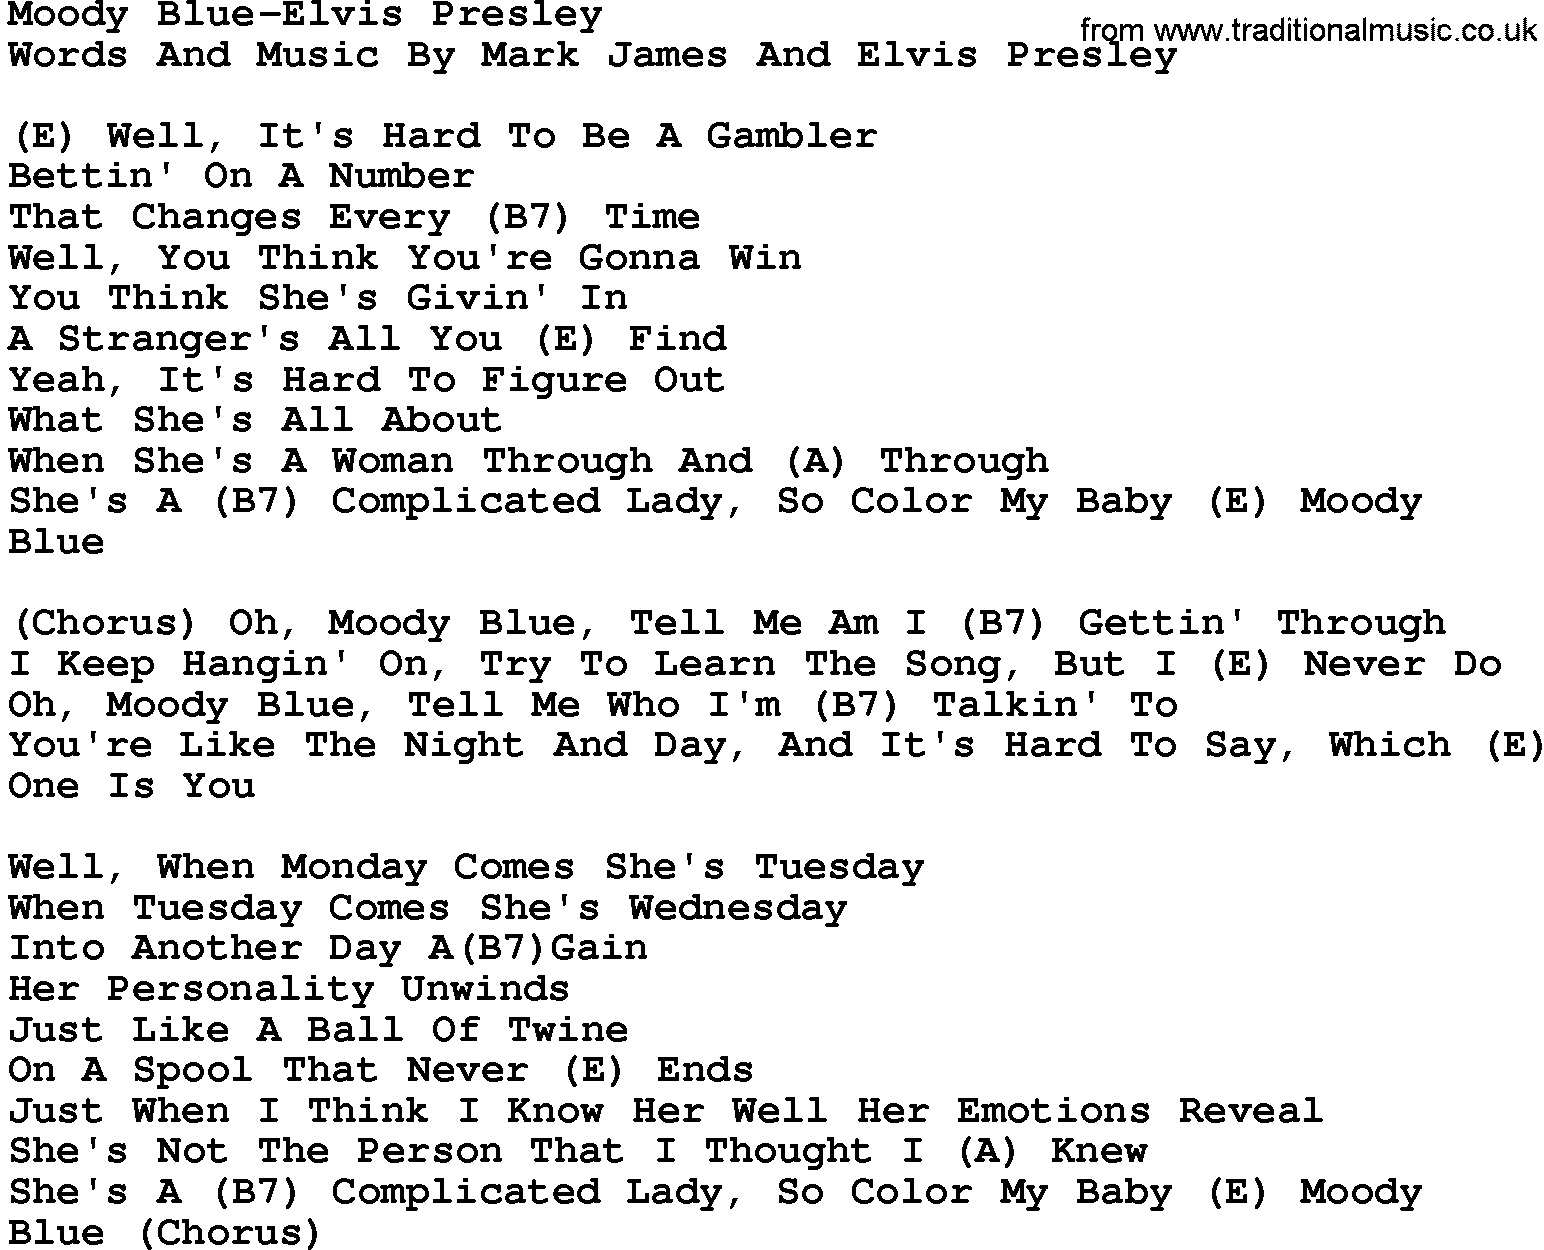 Country music song: Moody Blue-Elvis Presley lyrics and chords